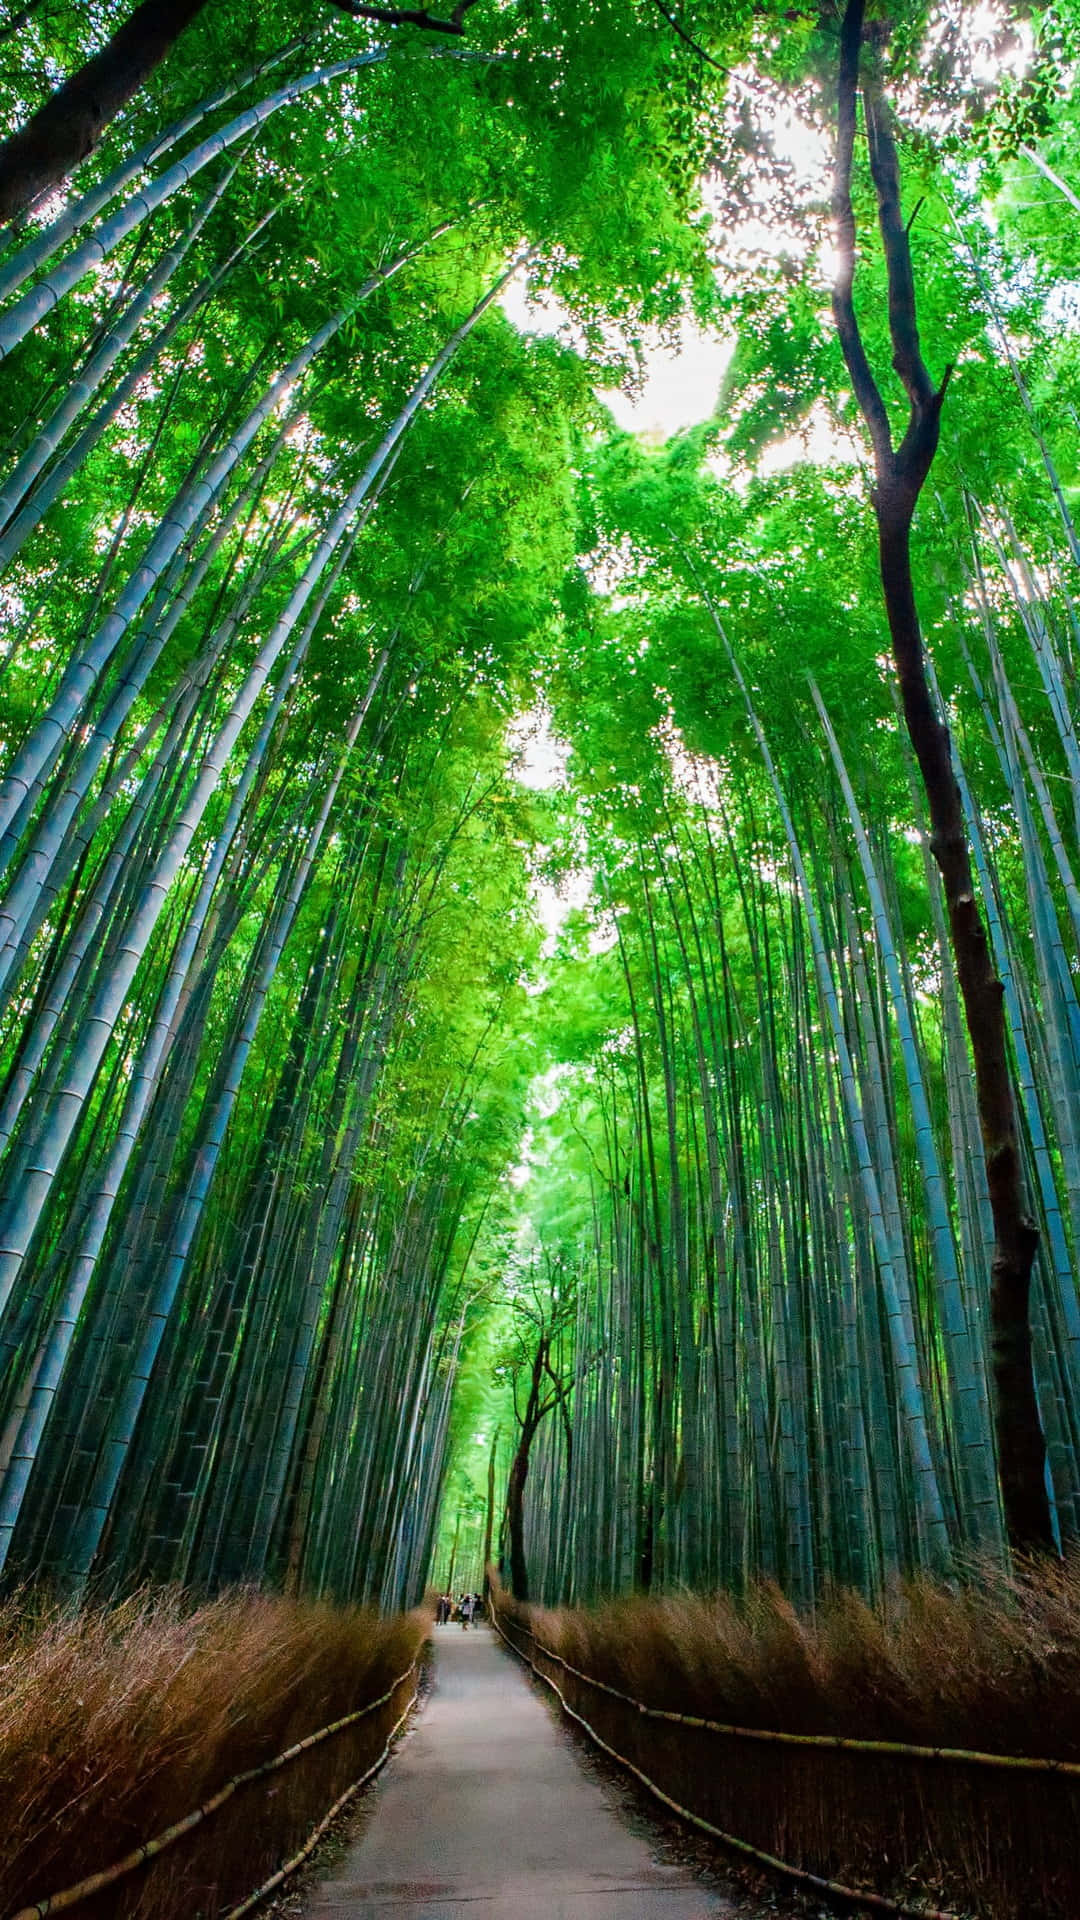 Take A Breath Of Fresh Air In A Serene Bamboo Forest. Background